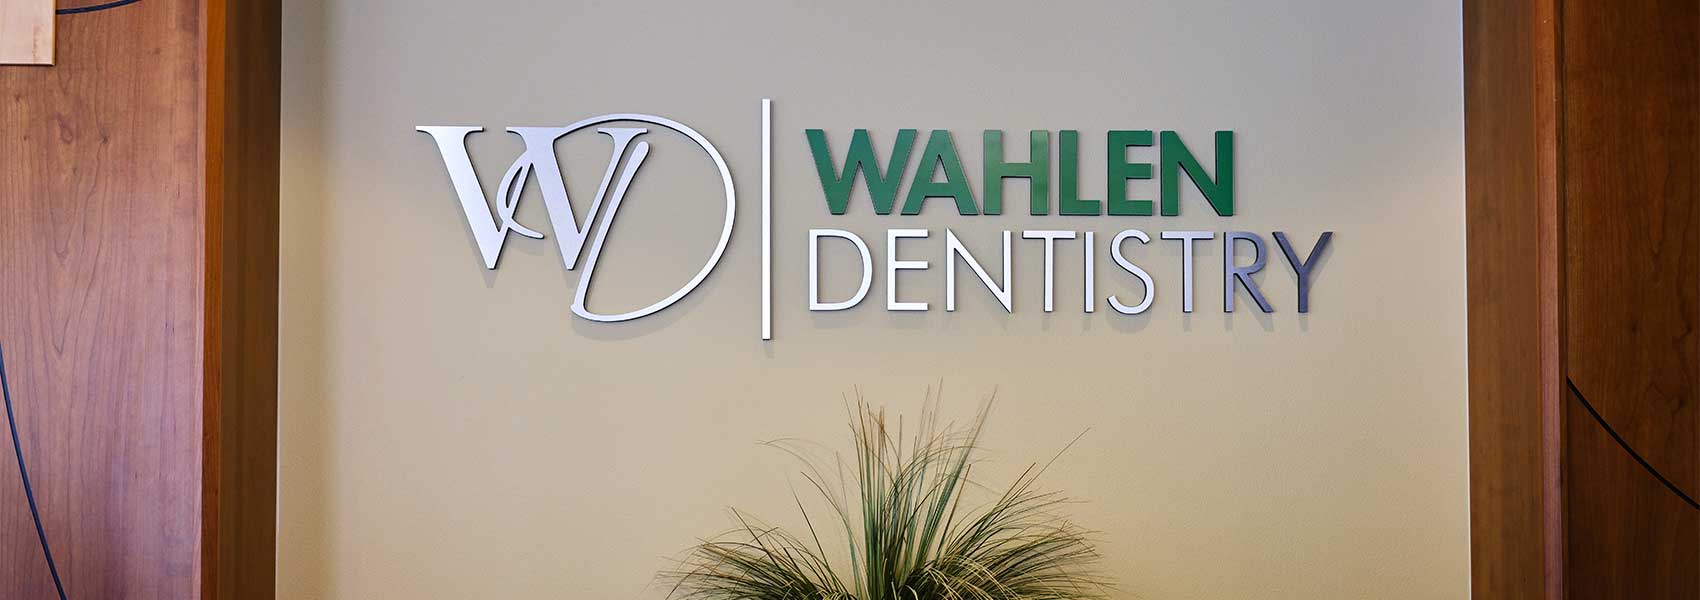 Wahlen Dentistry welcome area